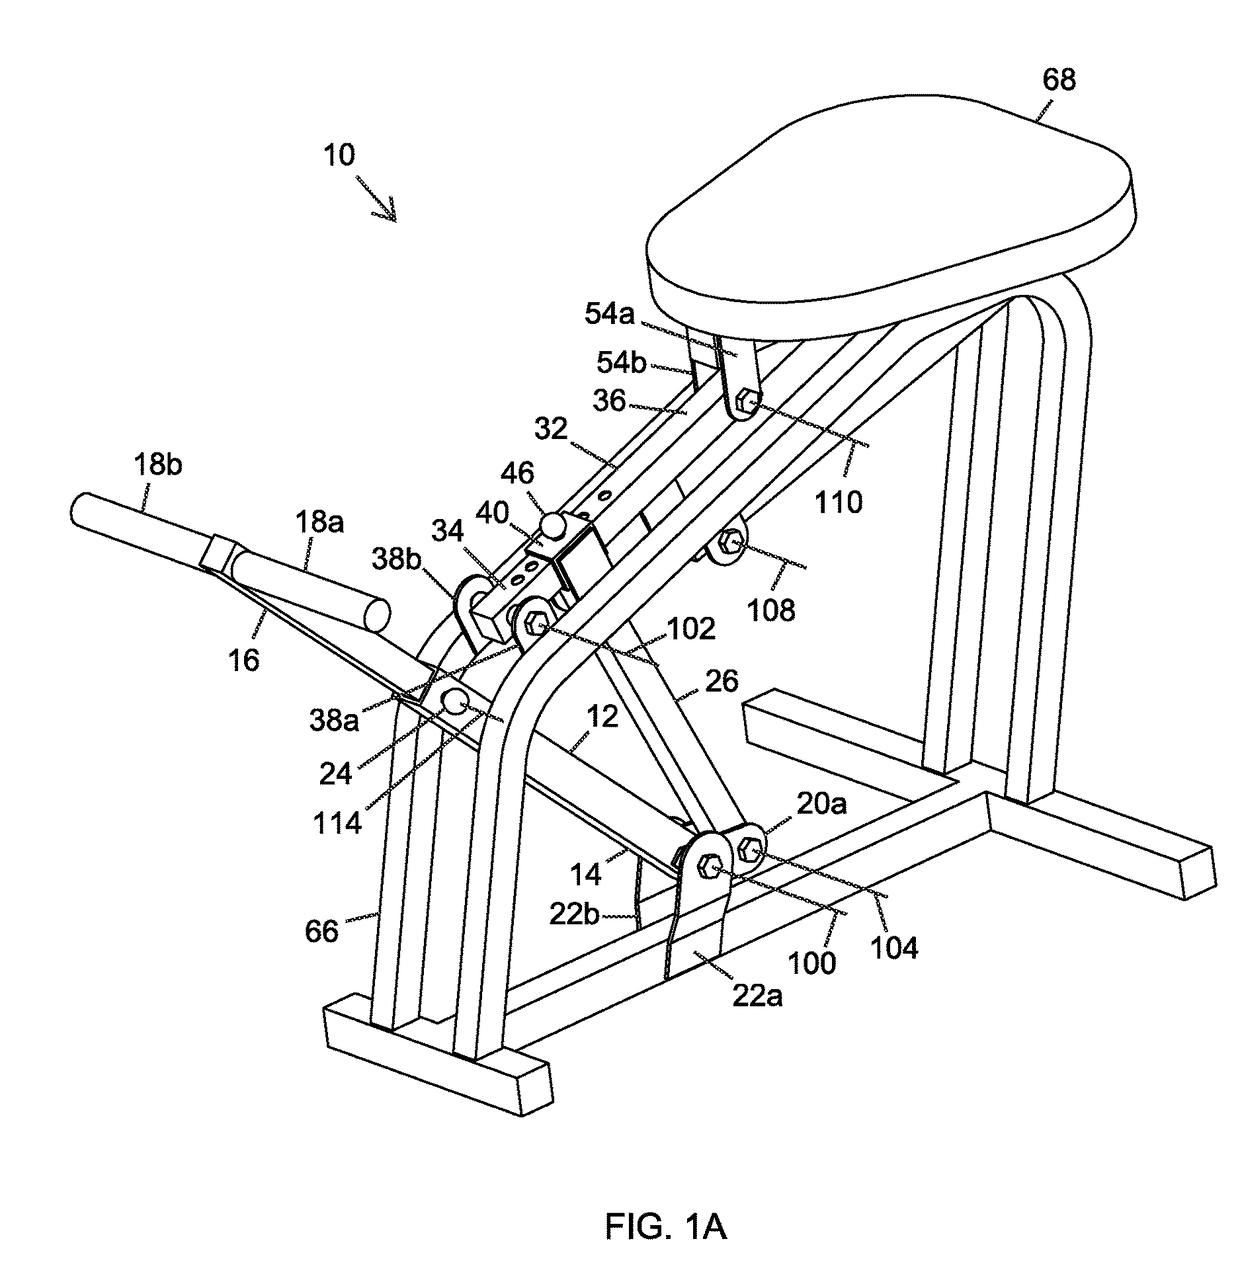 Exercise device utilizing body weight for resistance